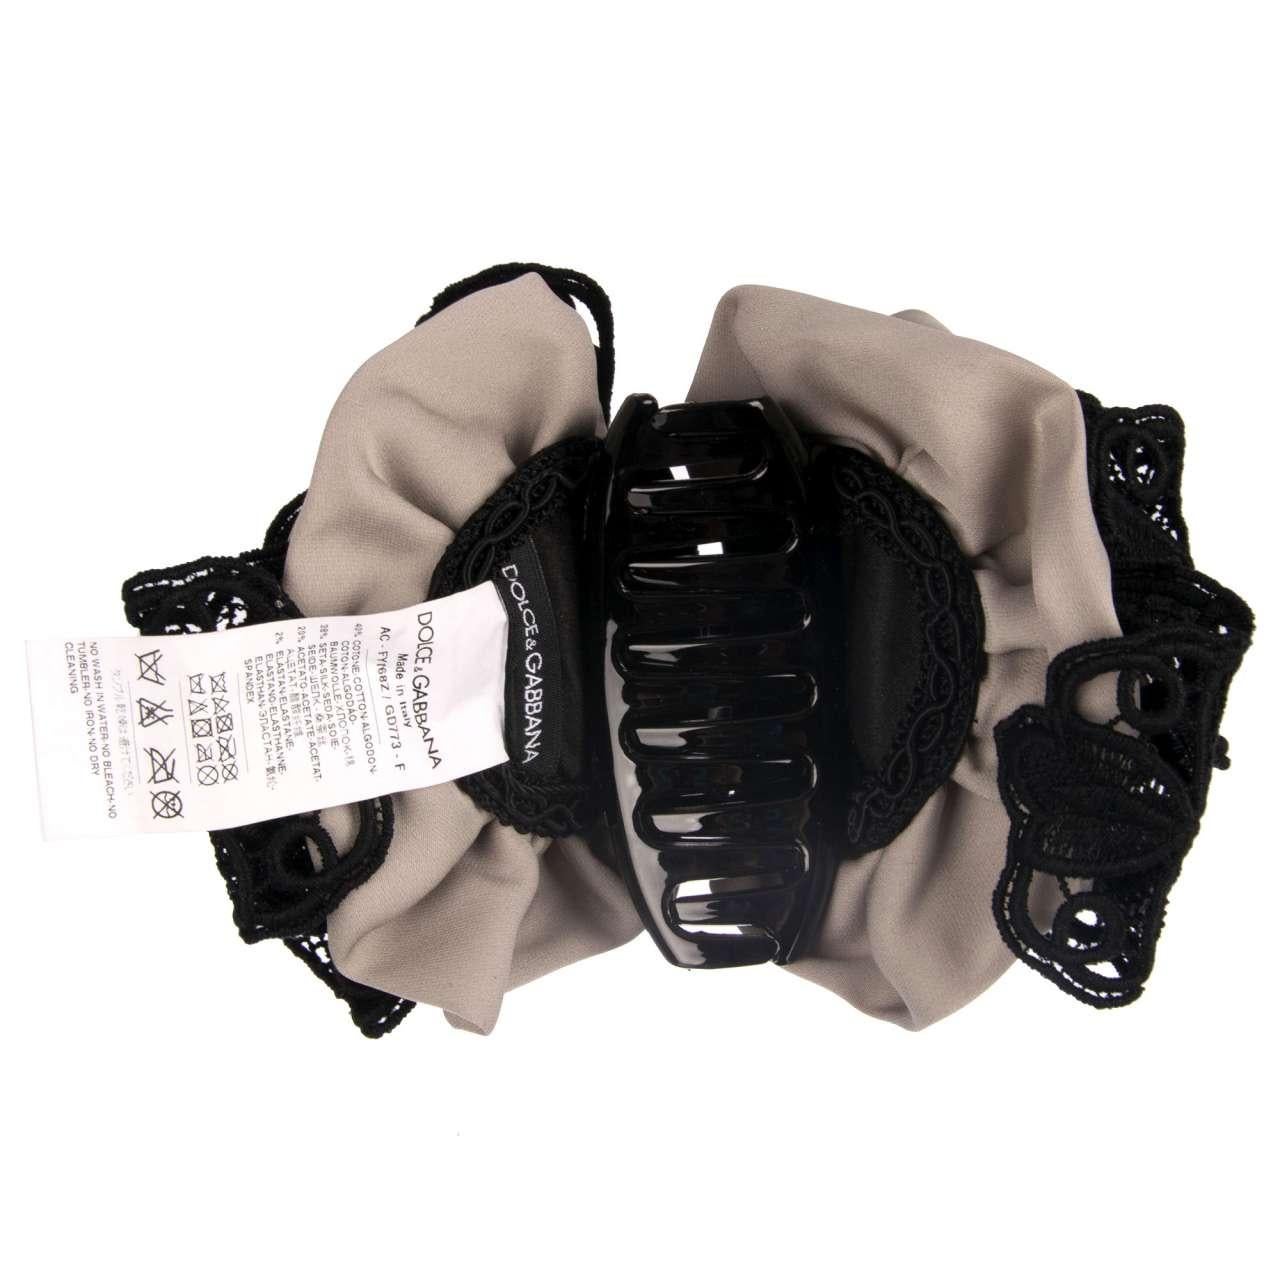 - Hair Clip / Slide made of silk and lace in black and gray color by DOLCE & GABBANA - MADE IN ITALY - New with Tag - Modell: FY168Z-GD773-S9001 - Composition: 40% Cotton, 38% Silk, 20% Acetate, 2% Elastane - Silk and lace curled ribbons - Color: